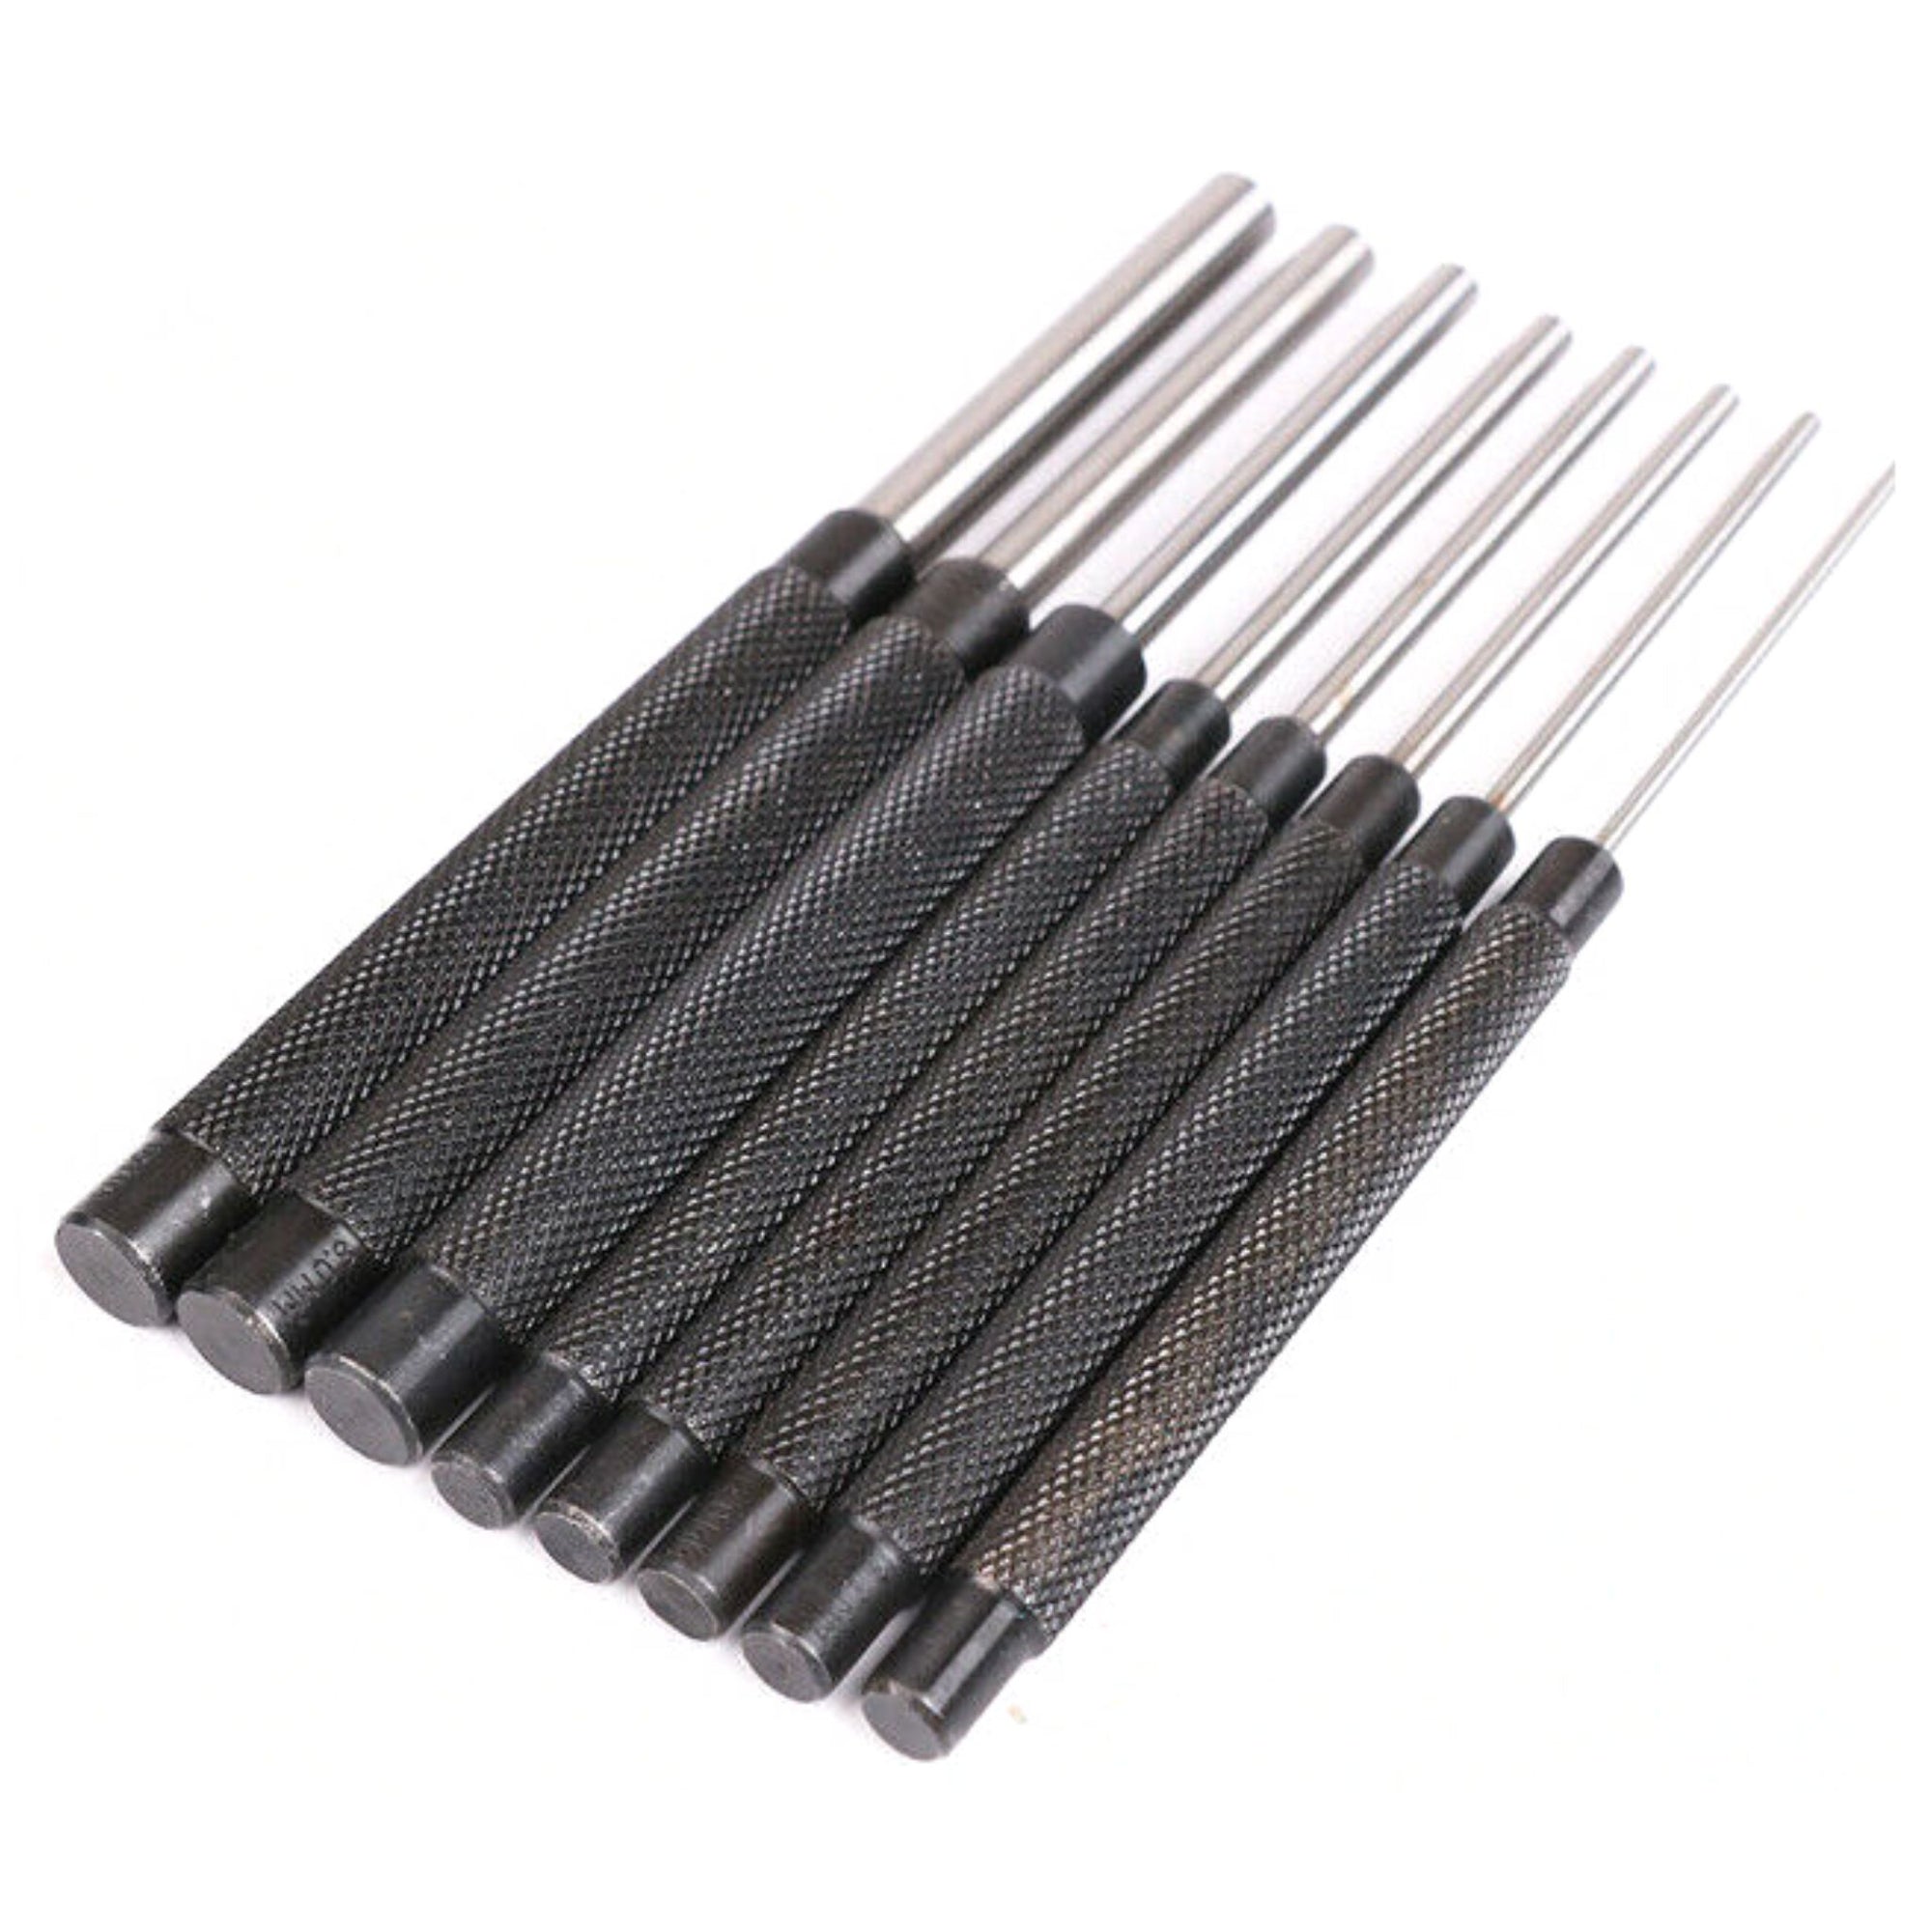 8 Piece Long Pin Punch Set - South East Clearance Centre